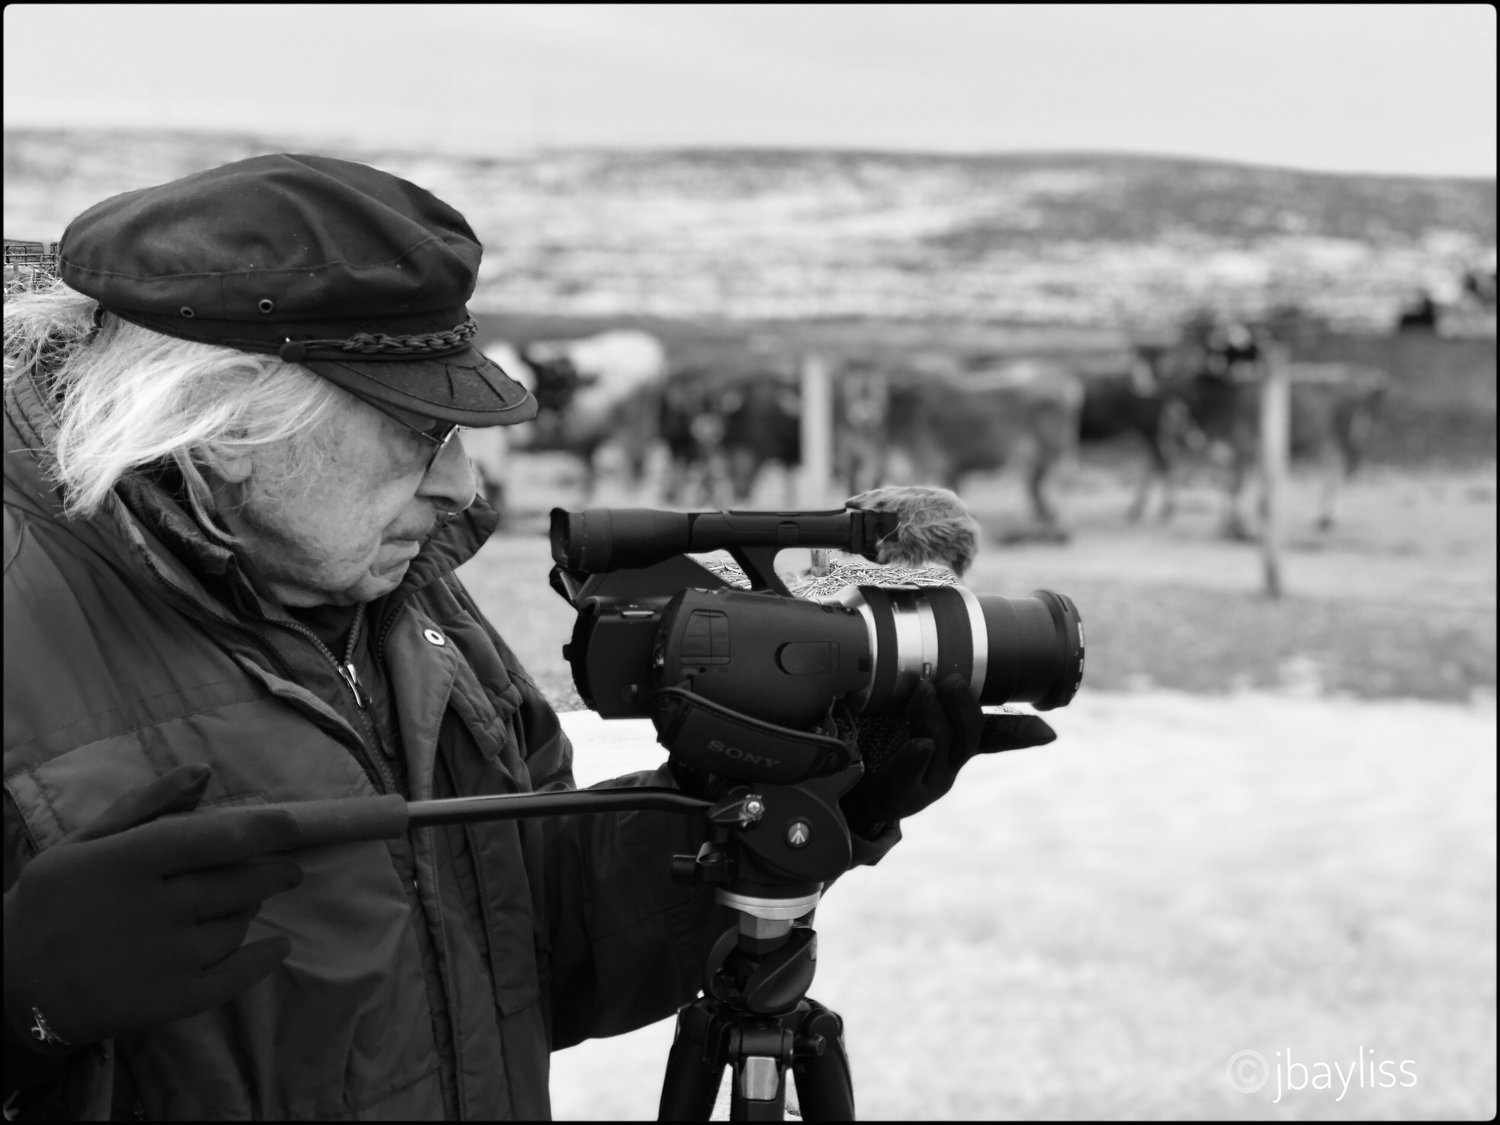 The whirlwind life of legendary film enthusiast, professor, writer, photographer, filmmaker, and founder of the University Film Society ended Dec. 20 when Al Milgrom, 98, succumbed to a stroke. (Photo by Janet Bayliss)